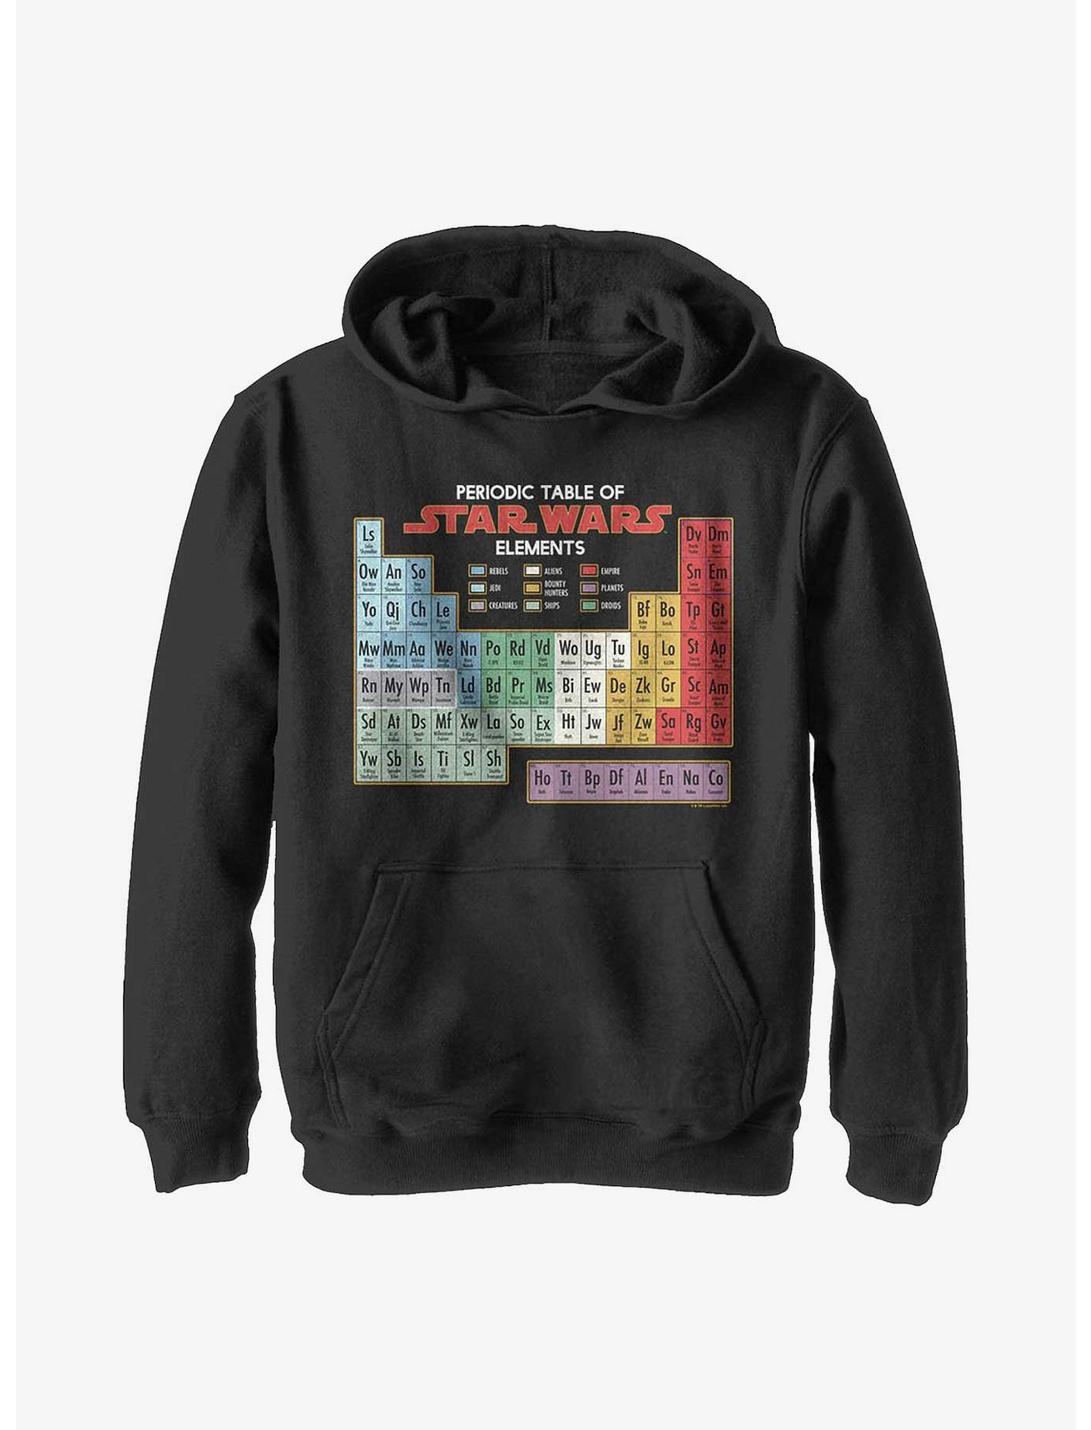 Plus Size Star Wars Periodic Table Youth Hoodie, BLACK, hi-res